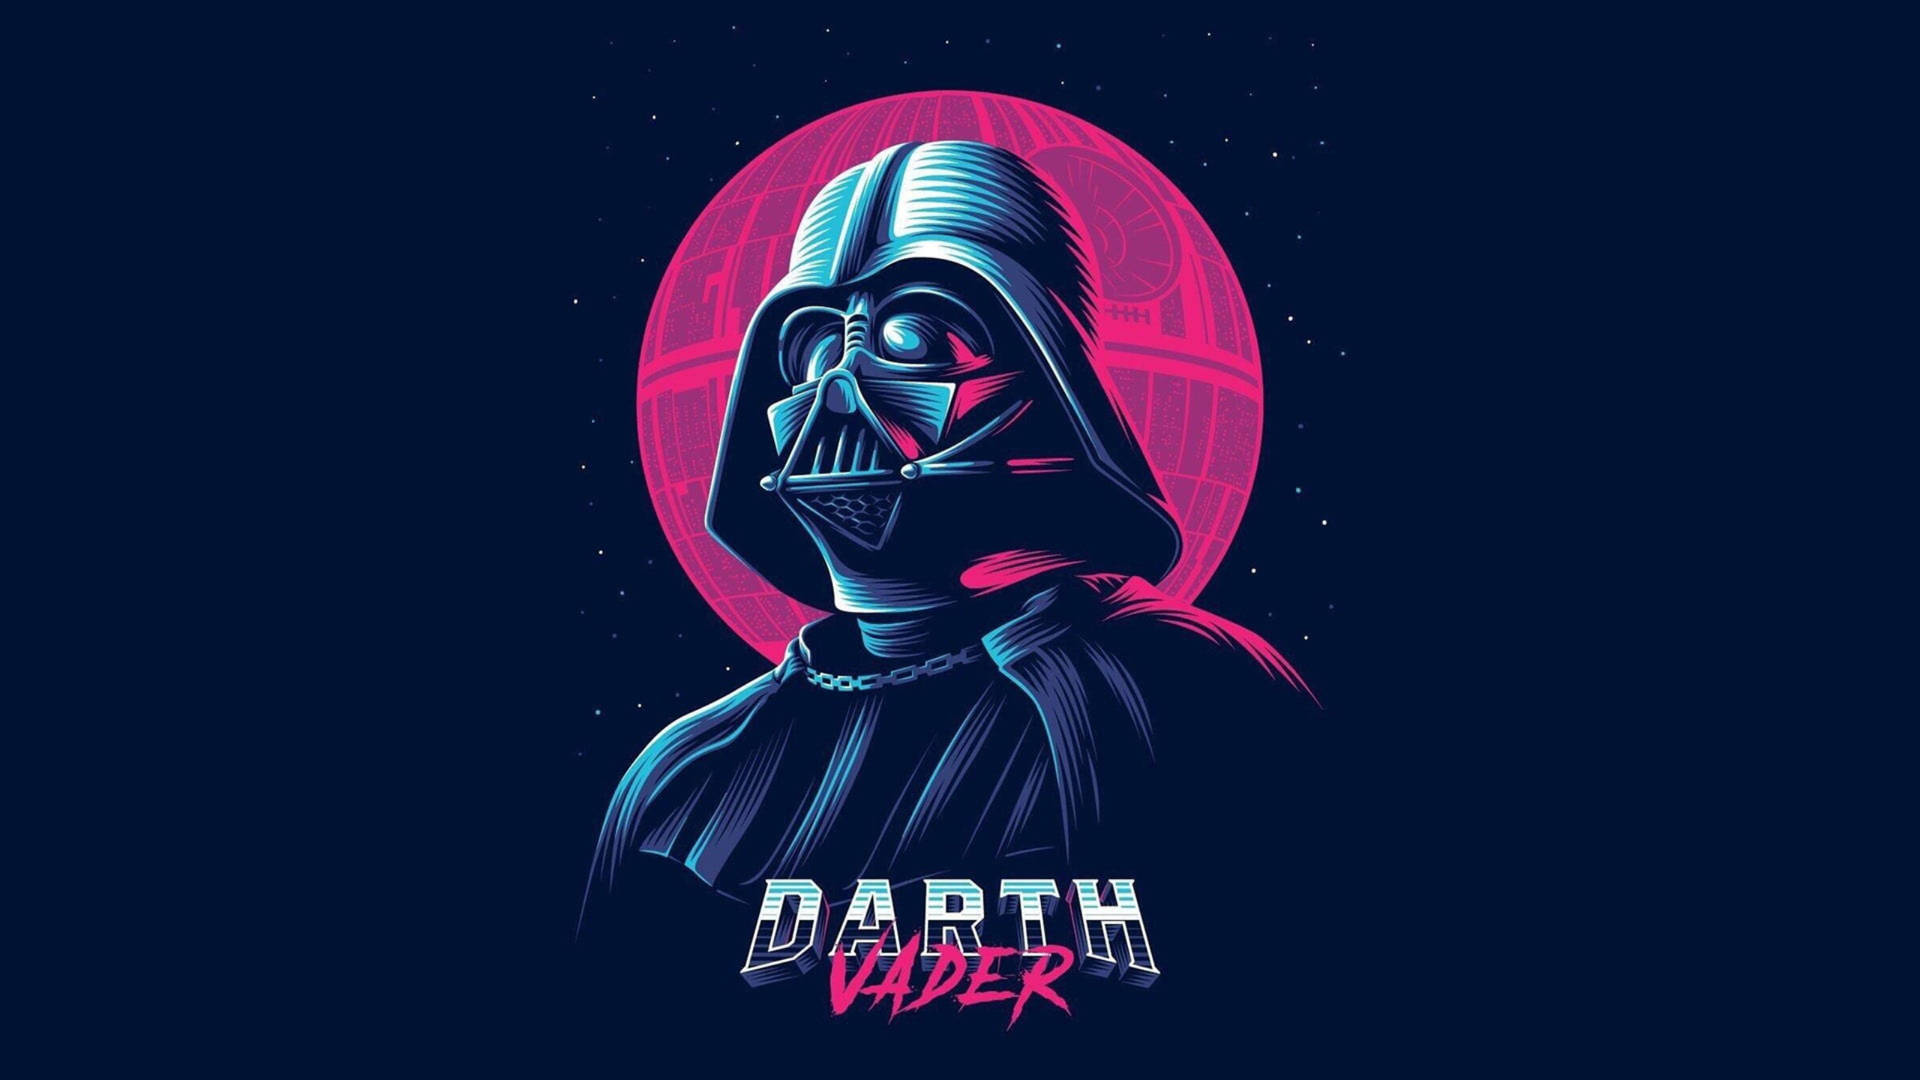 Darth Vader In Neon Aesthetic Background